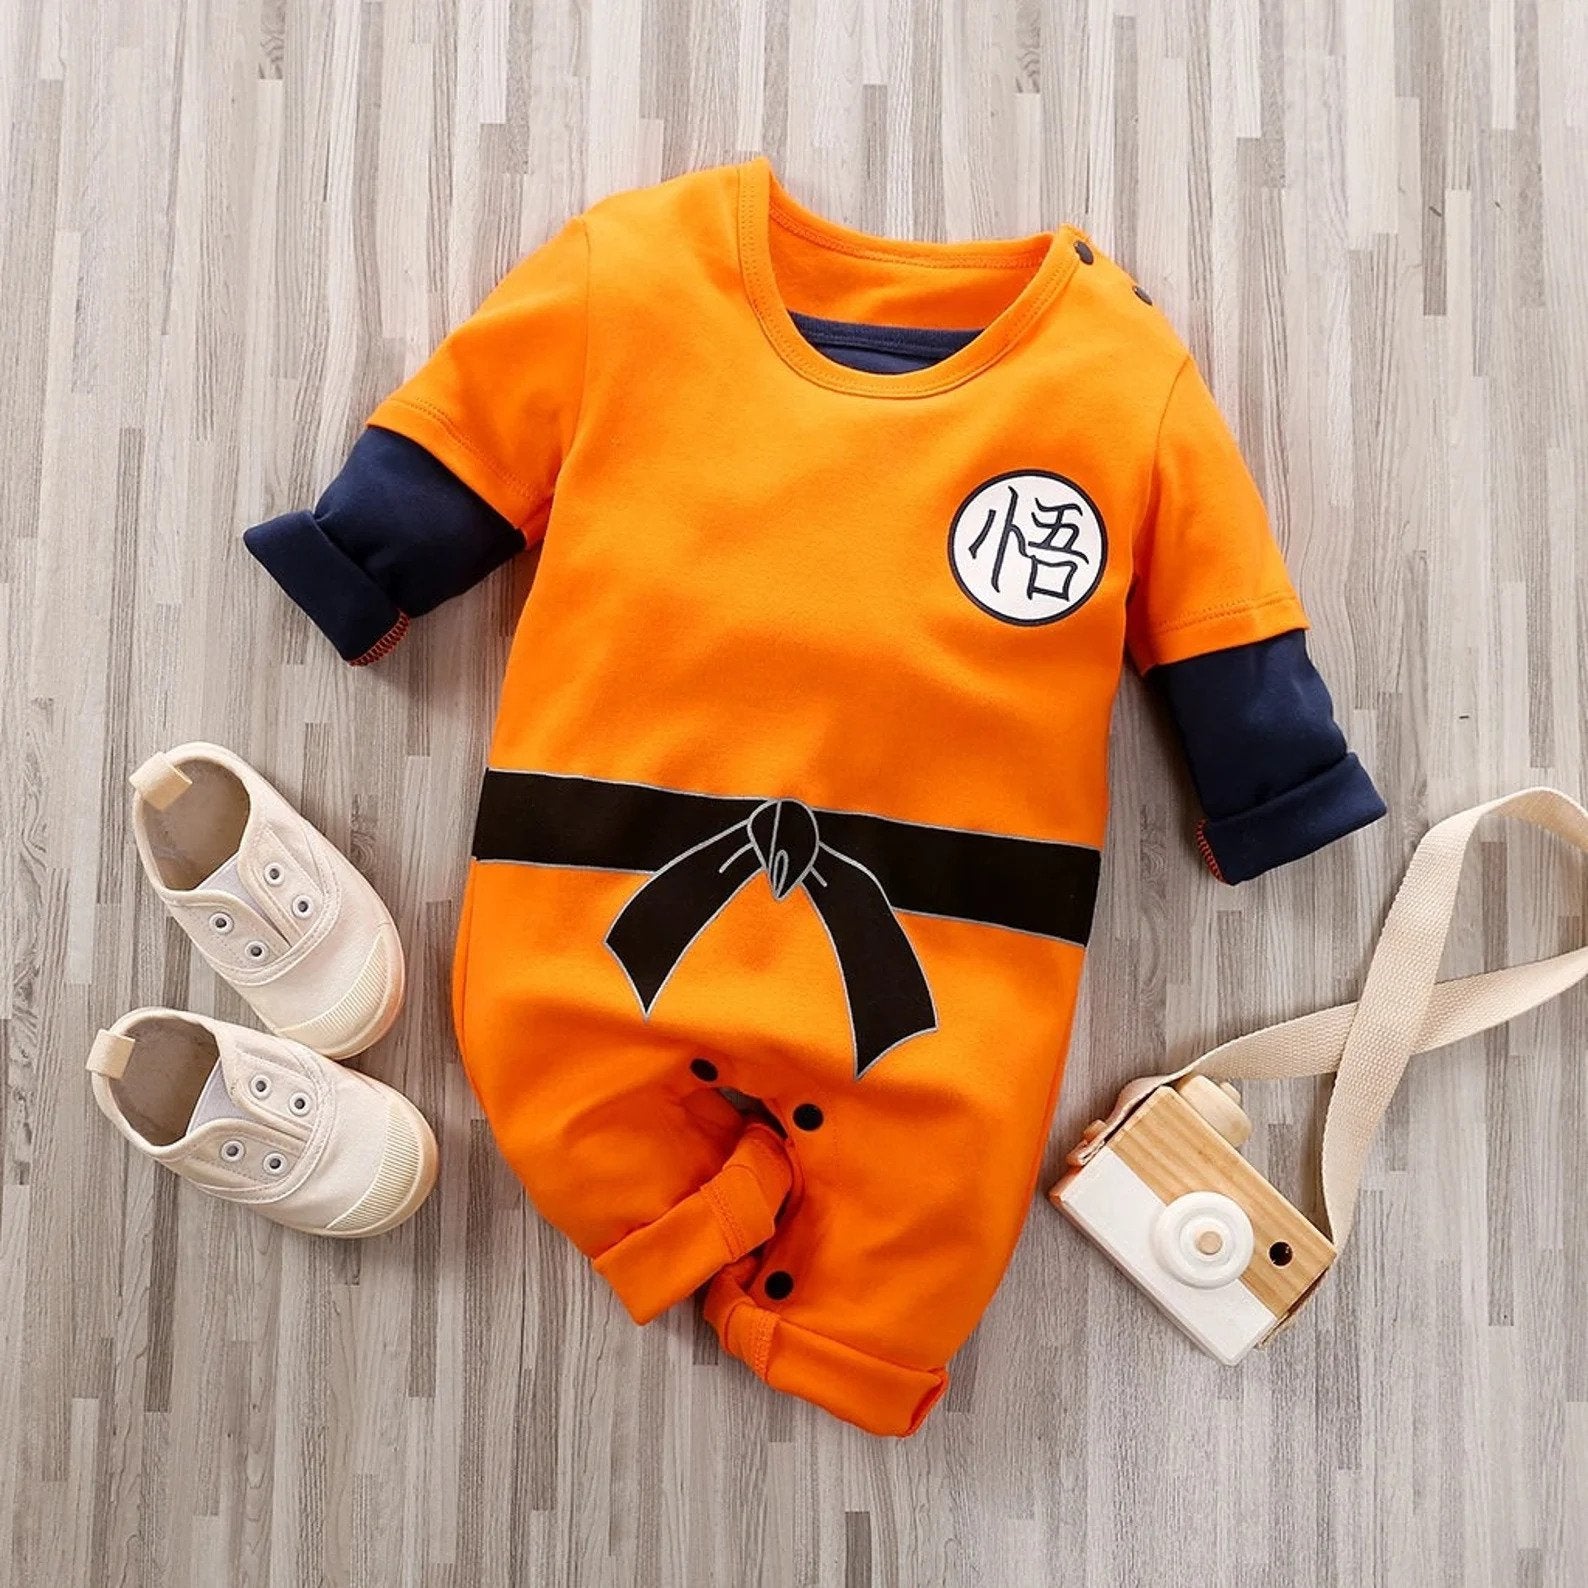 Dressing Up Your Little One: A Guide to Buying the Perfect Goku Baby Onesie